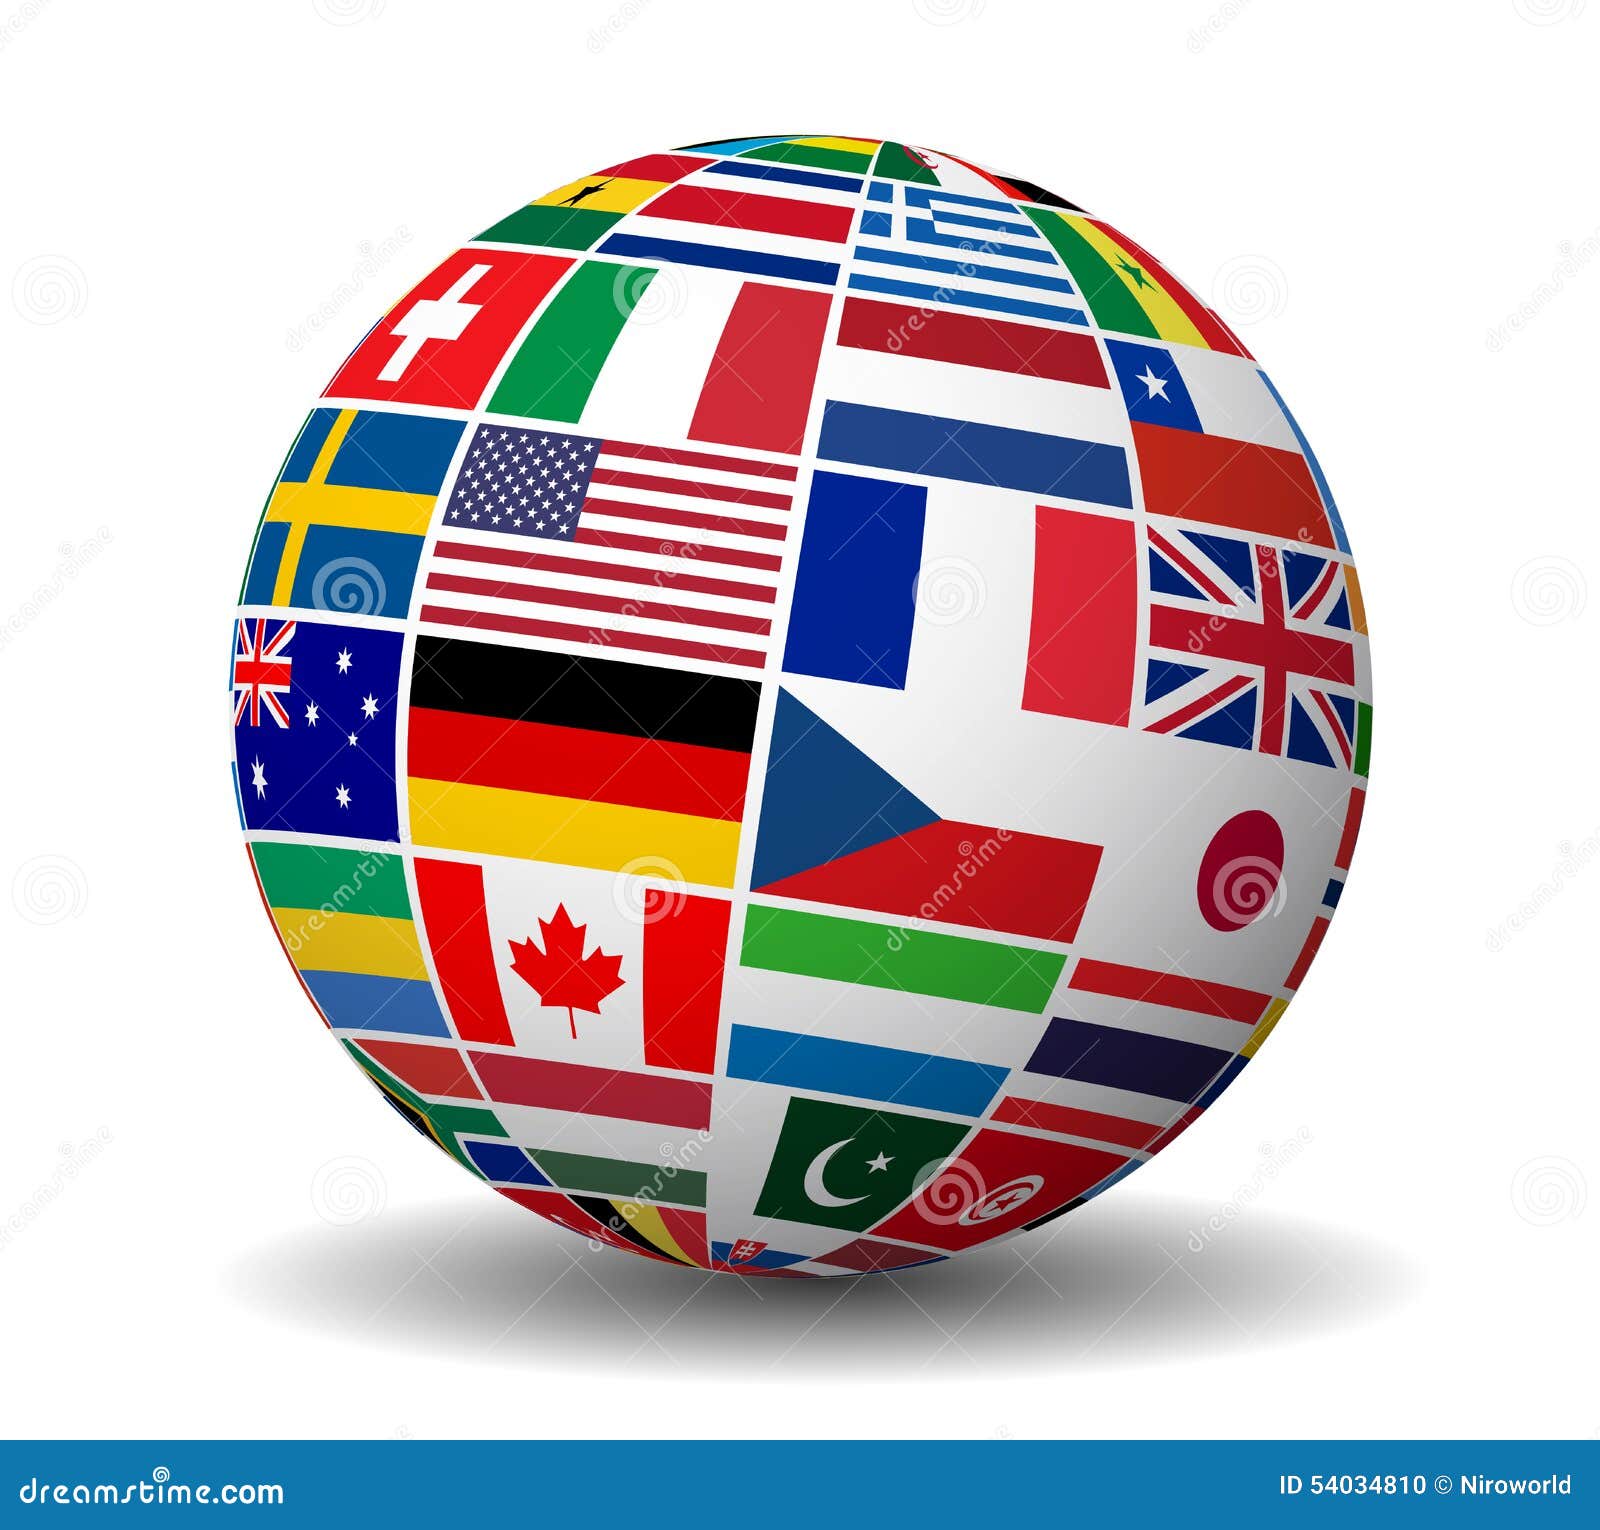 global business clipart - photo #41